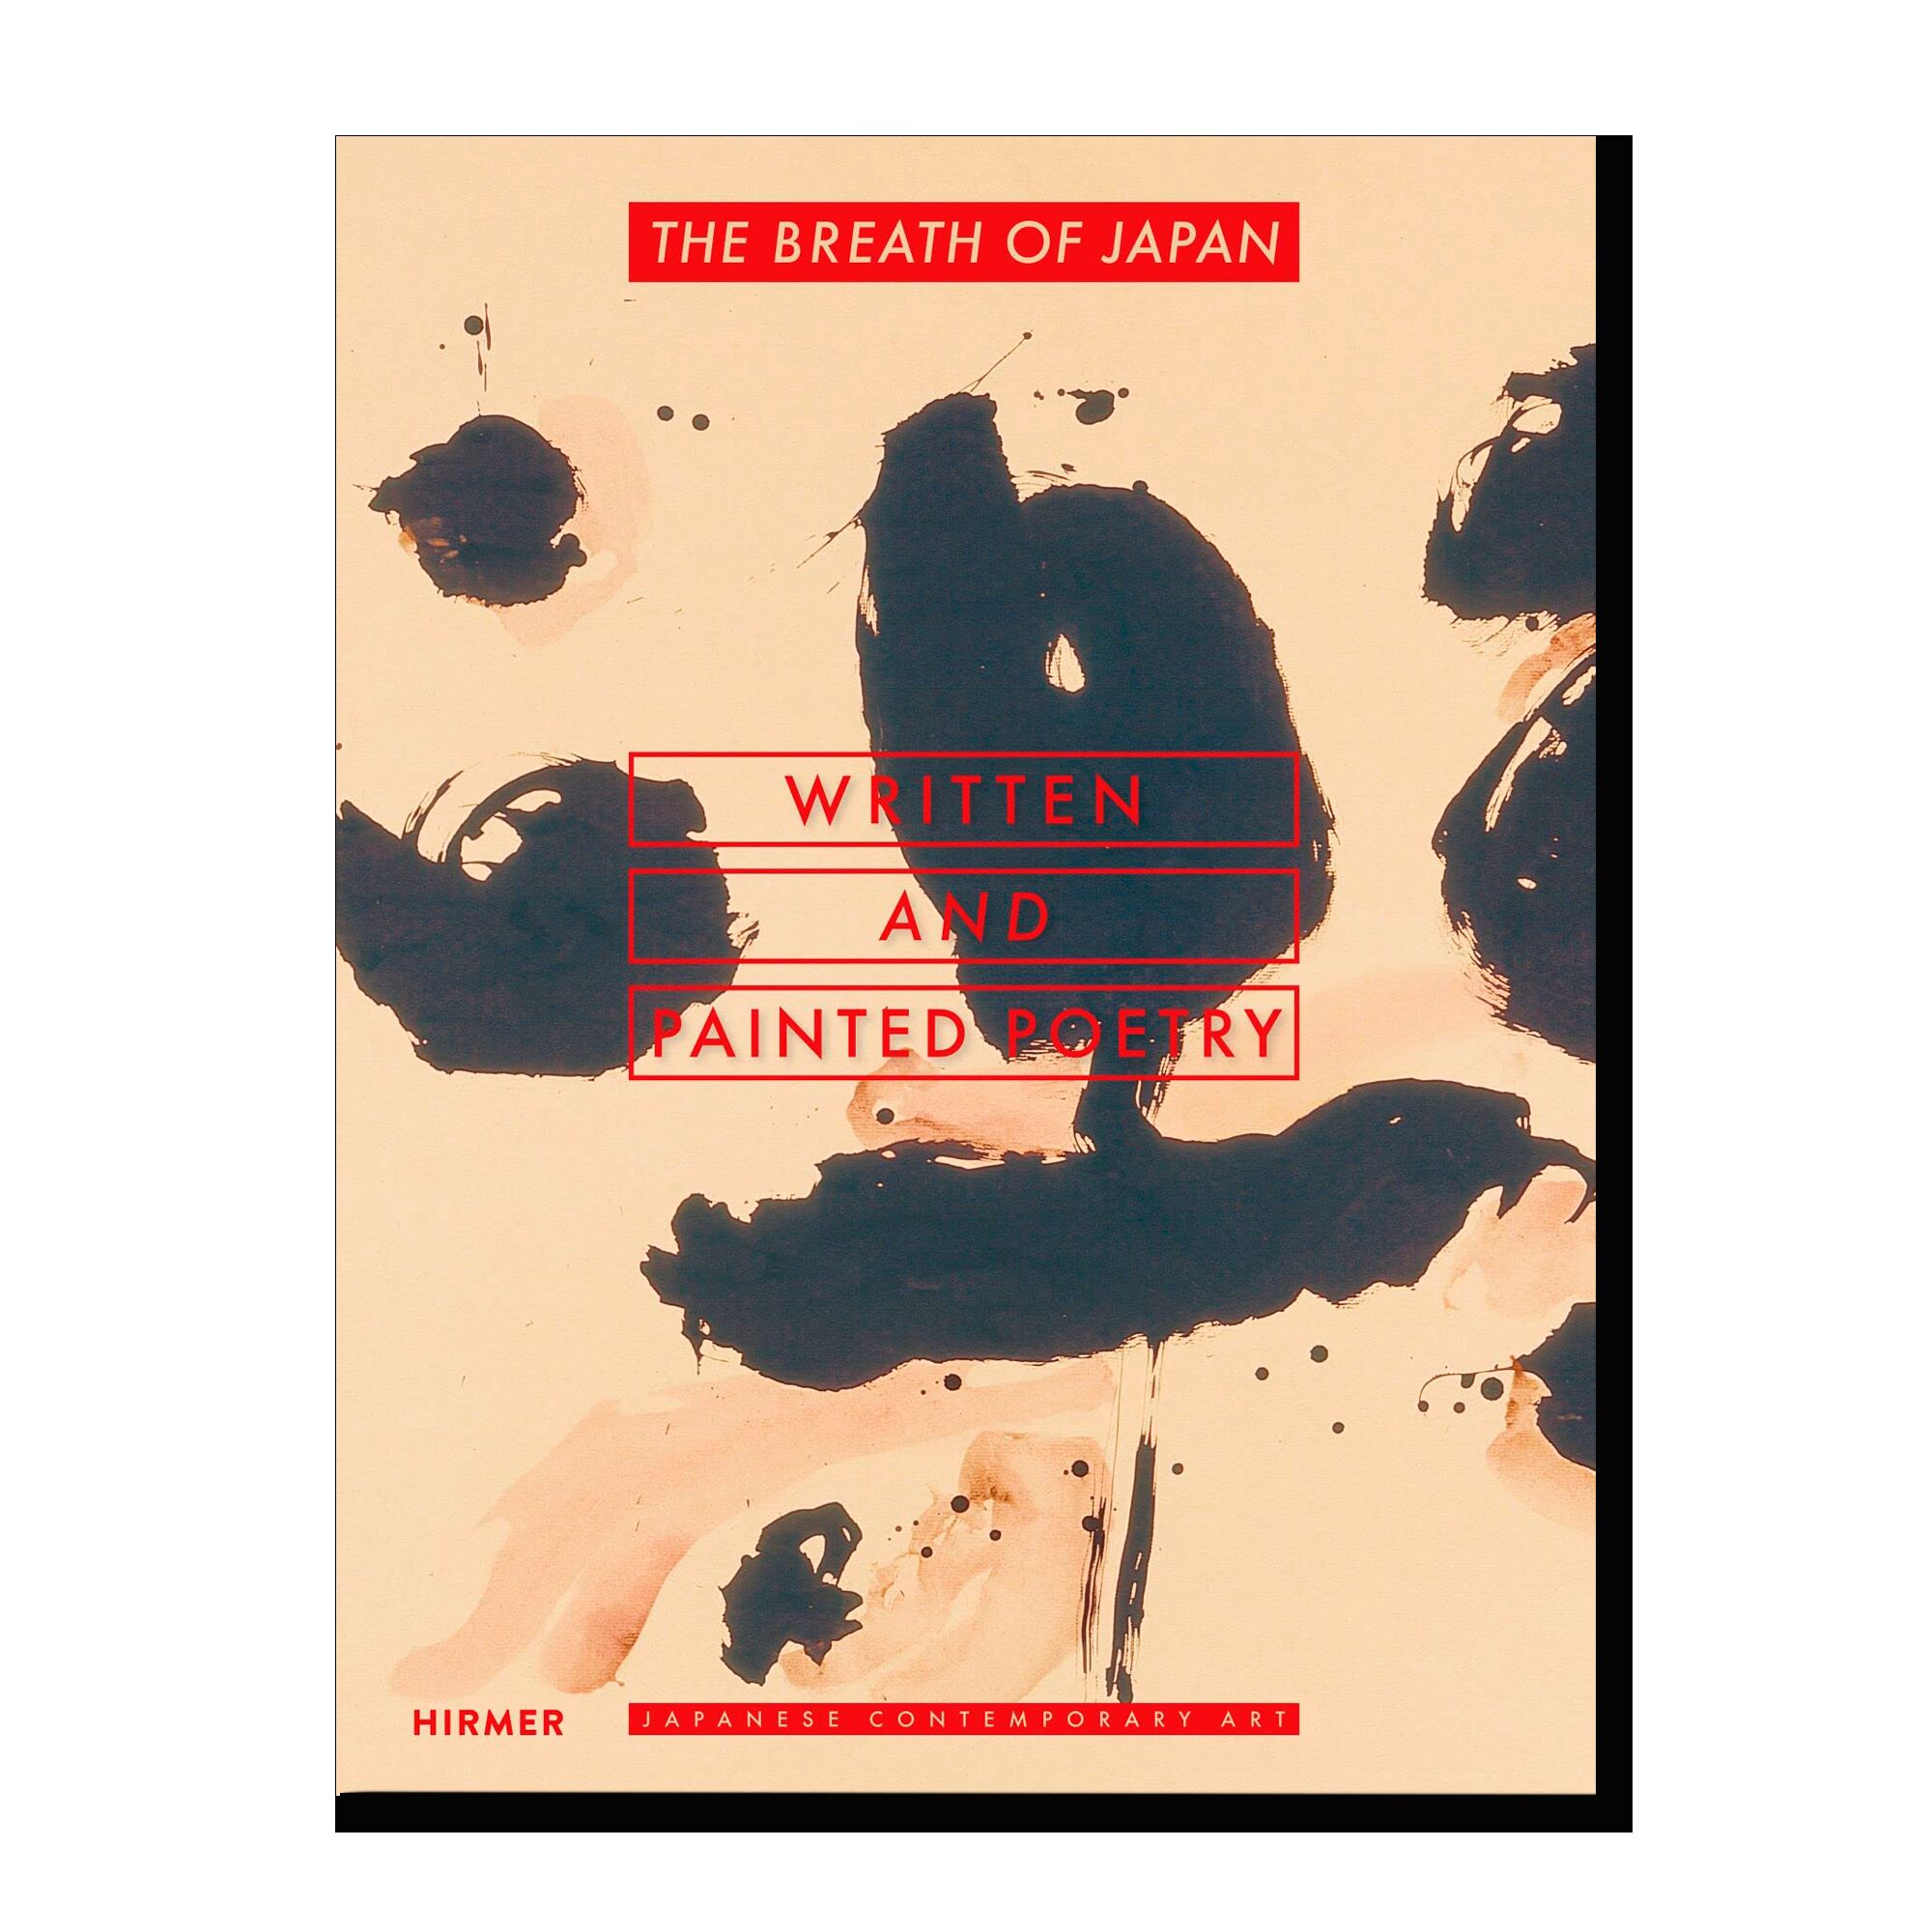 The Breath of Japan: Written and Painted Poetry